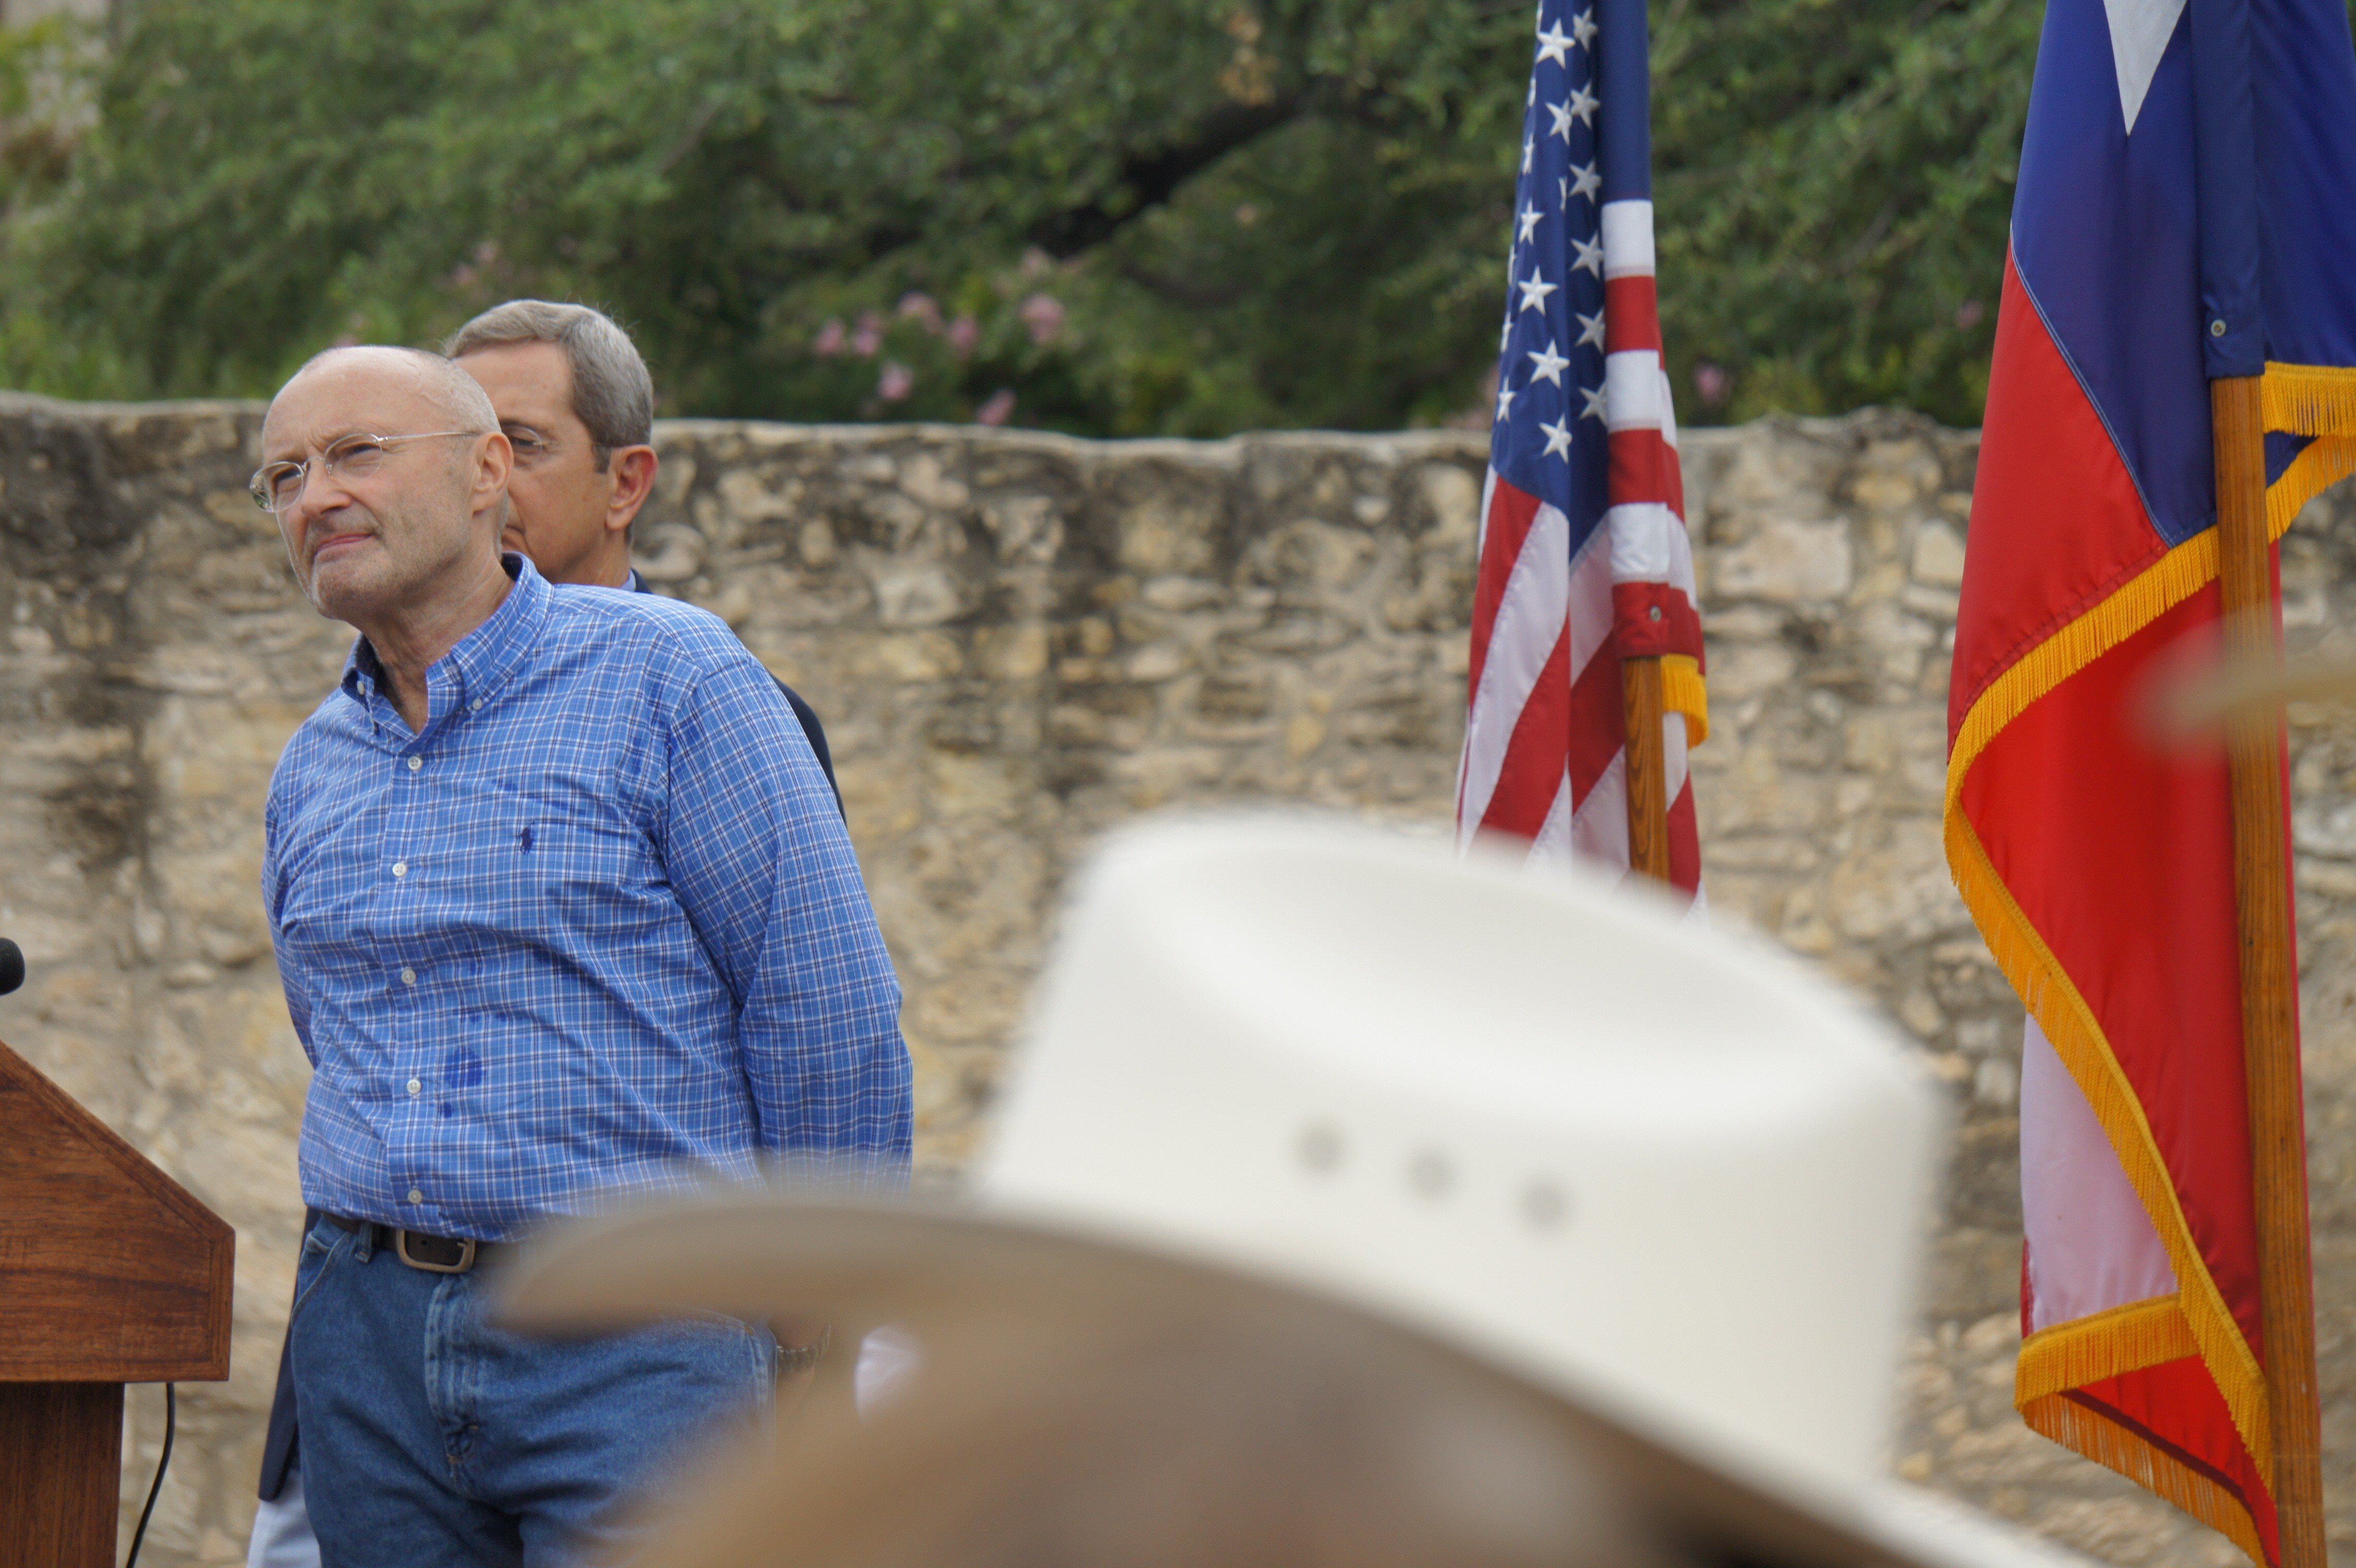 Former Genesis member and Alamo enthusiast Phil Collins is joined onstage by Texas Land Commissioner Jerry Patterson in front of the Alamo on June 26, 2014. Collins formally announced his intention to donate his entire private collection of Texas Revolution memorabilia to the state of Texas. - Albert Salazar